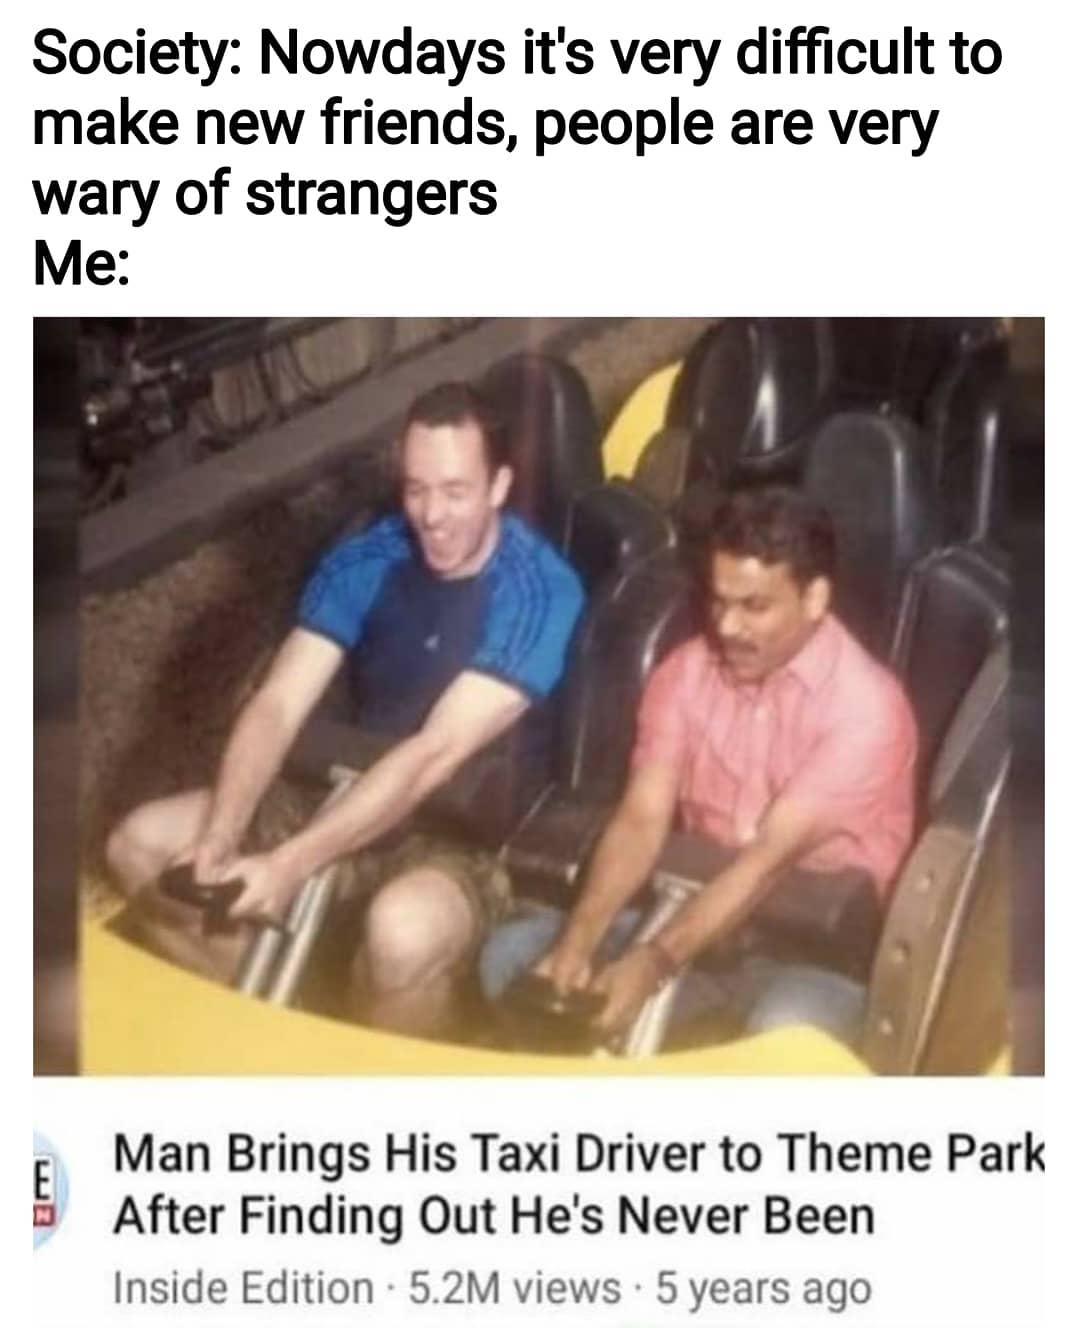 Society: Nowdays it's very difficult to make new friends, people are very wary of strangers. Me: Man brings his taxi driver to theme park after finding out he's never been inside.